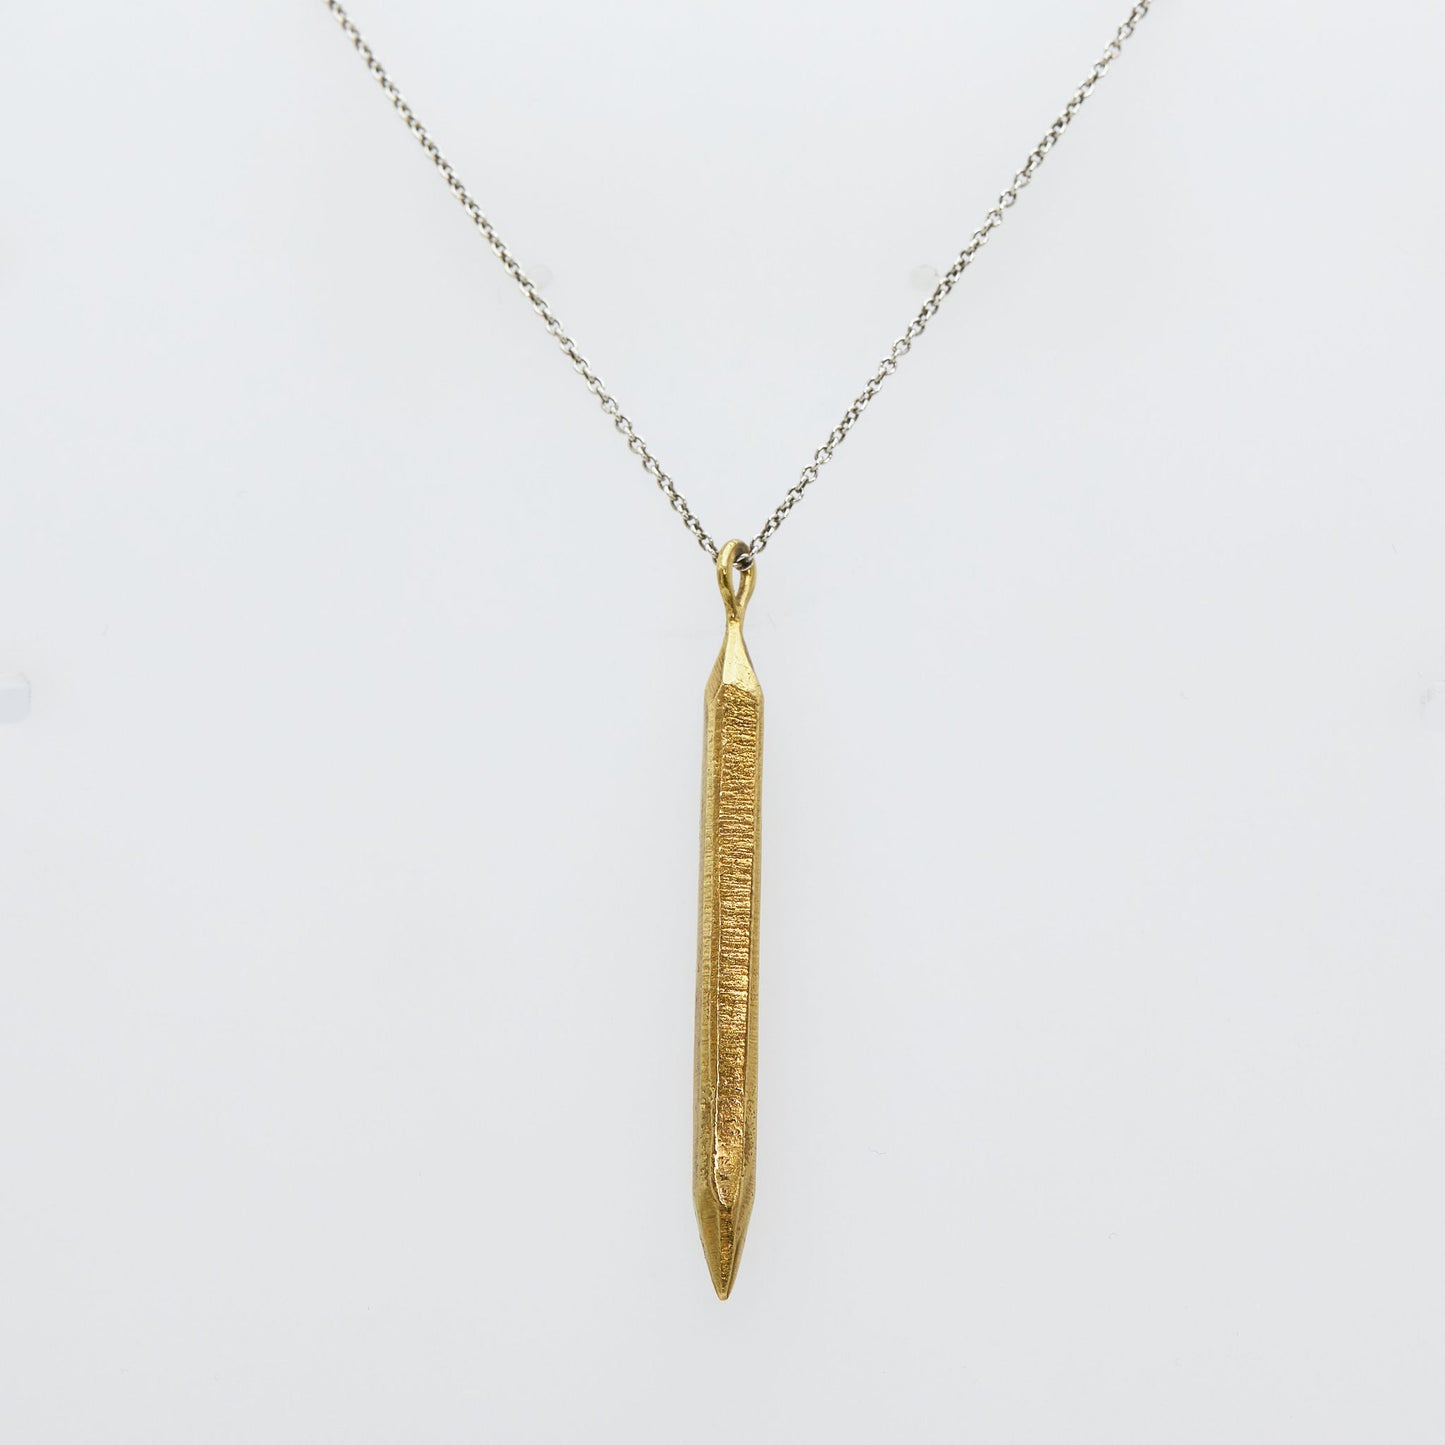 Load image into Gallery viewer, Brass pendulum pendant on white background
